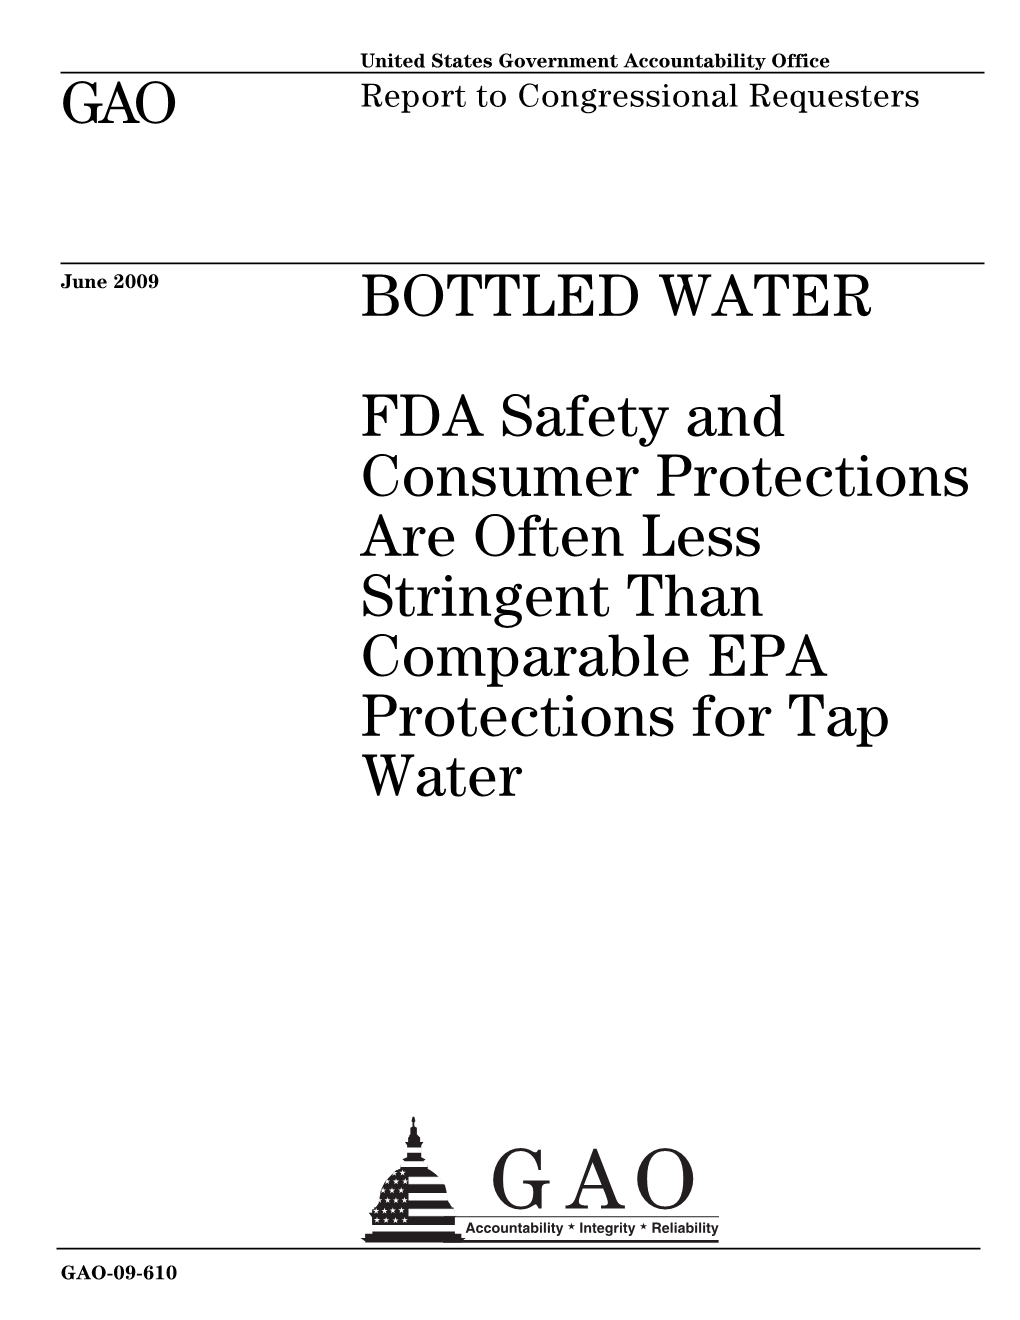 GAO-09-610 Bottled Water: FDA Safety and Consumer Protections